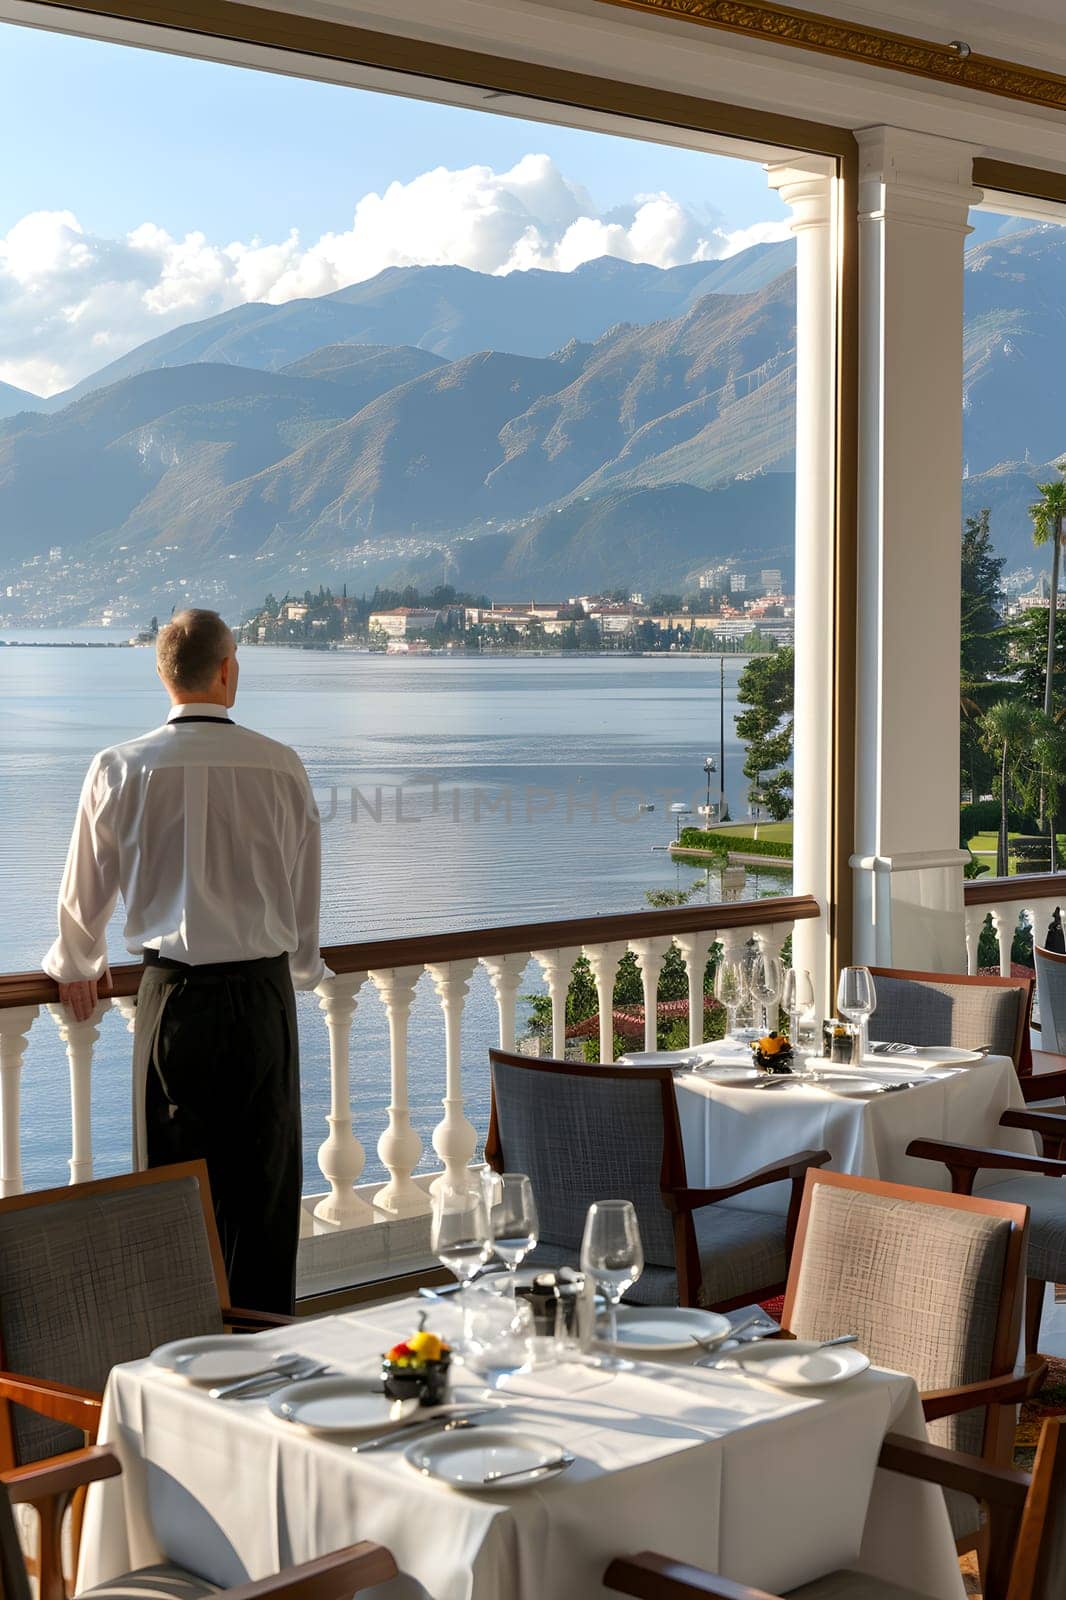 Man on balcony with lake, mountains, and sky in view by Nadtochiy